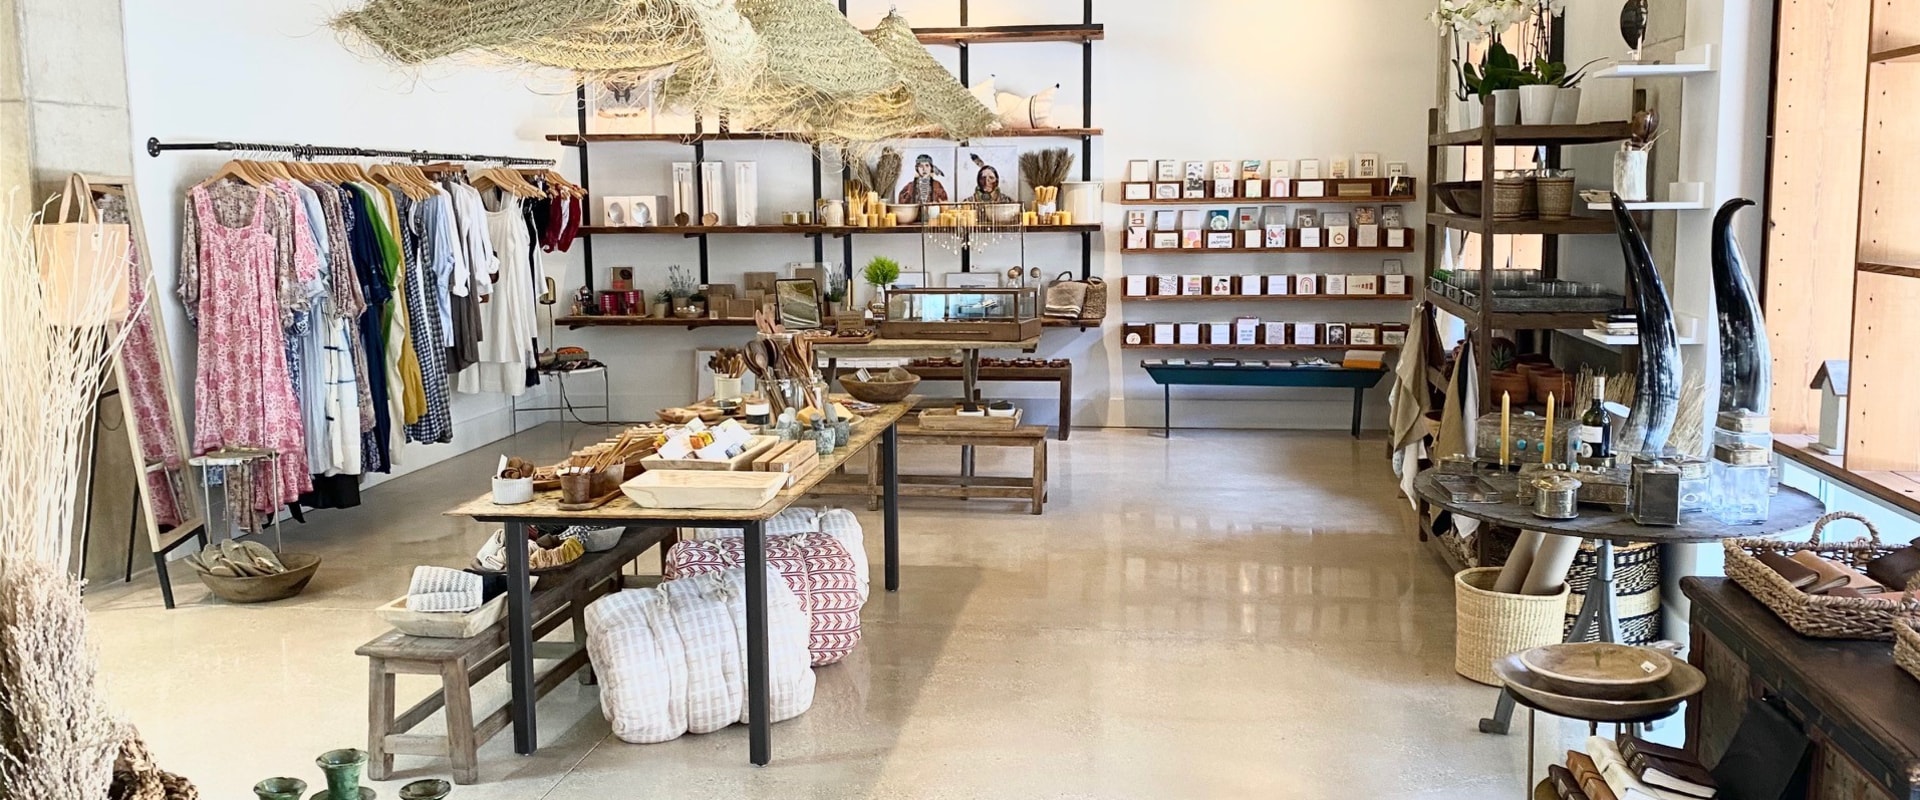 An In-Depth Look at ByGeorge - San Antonio's Boutique Shopping